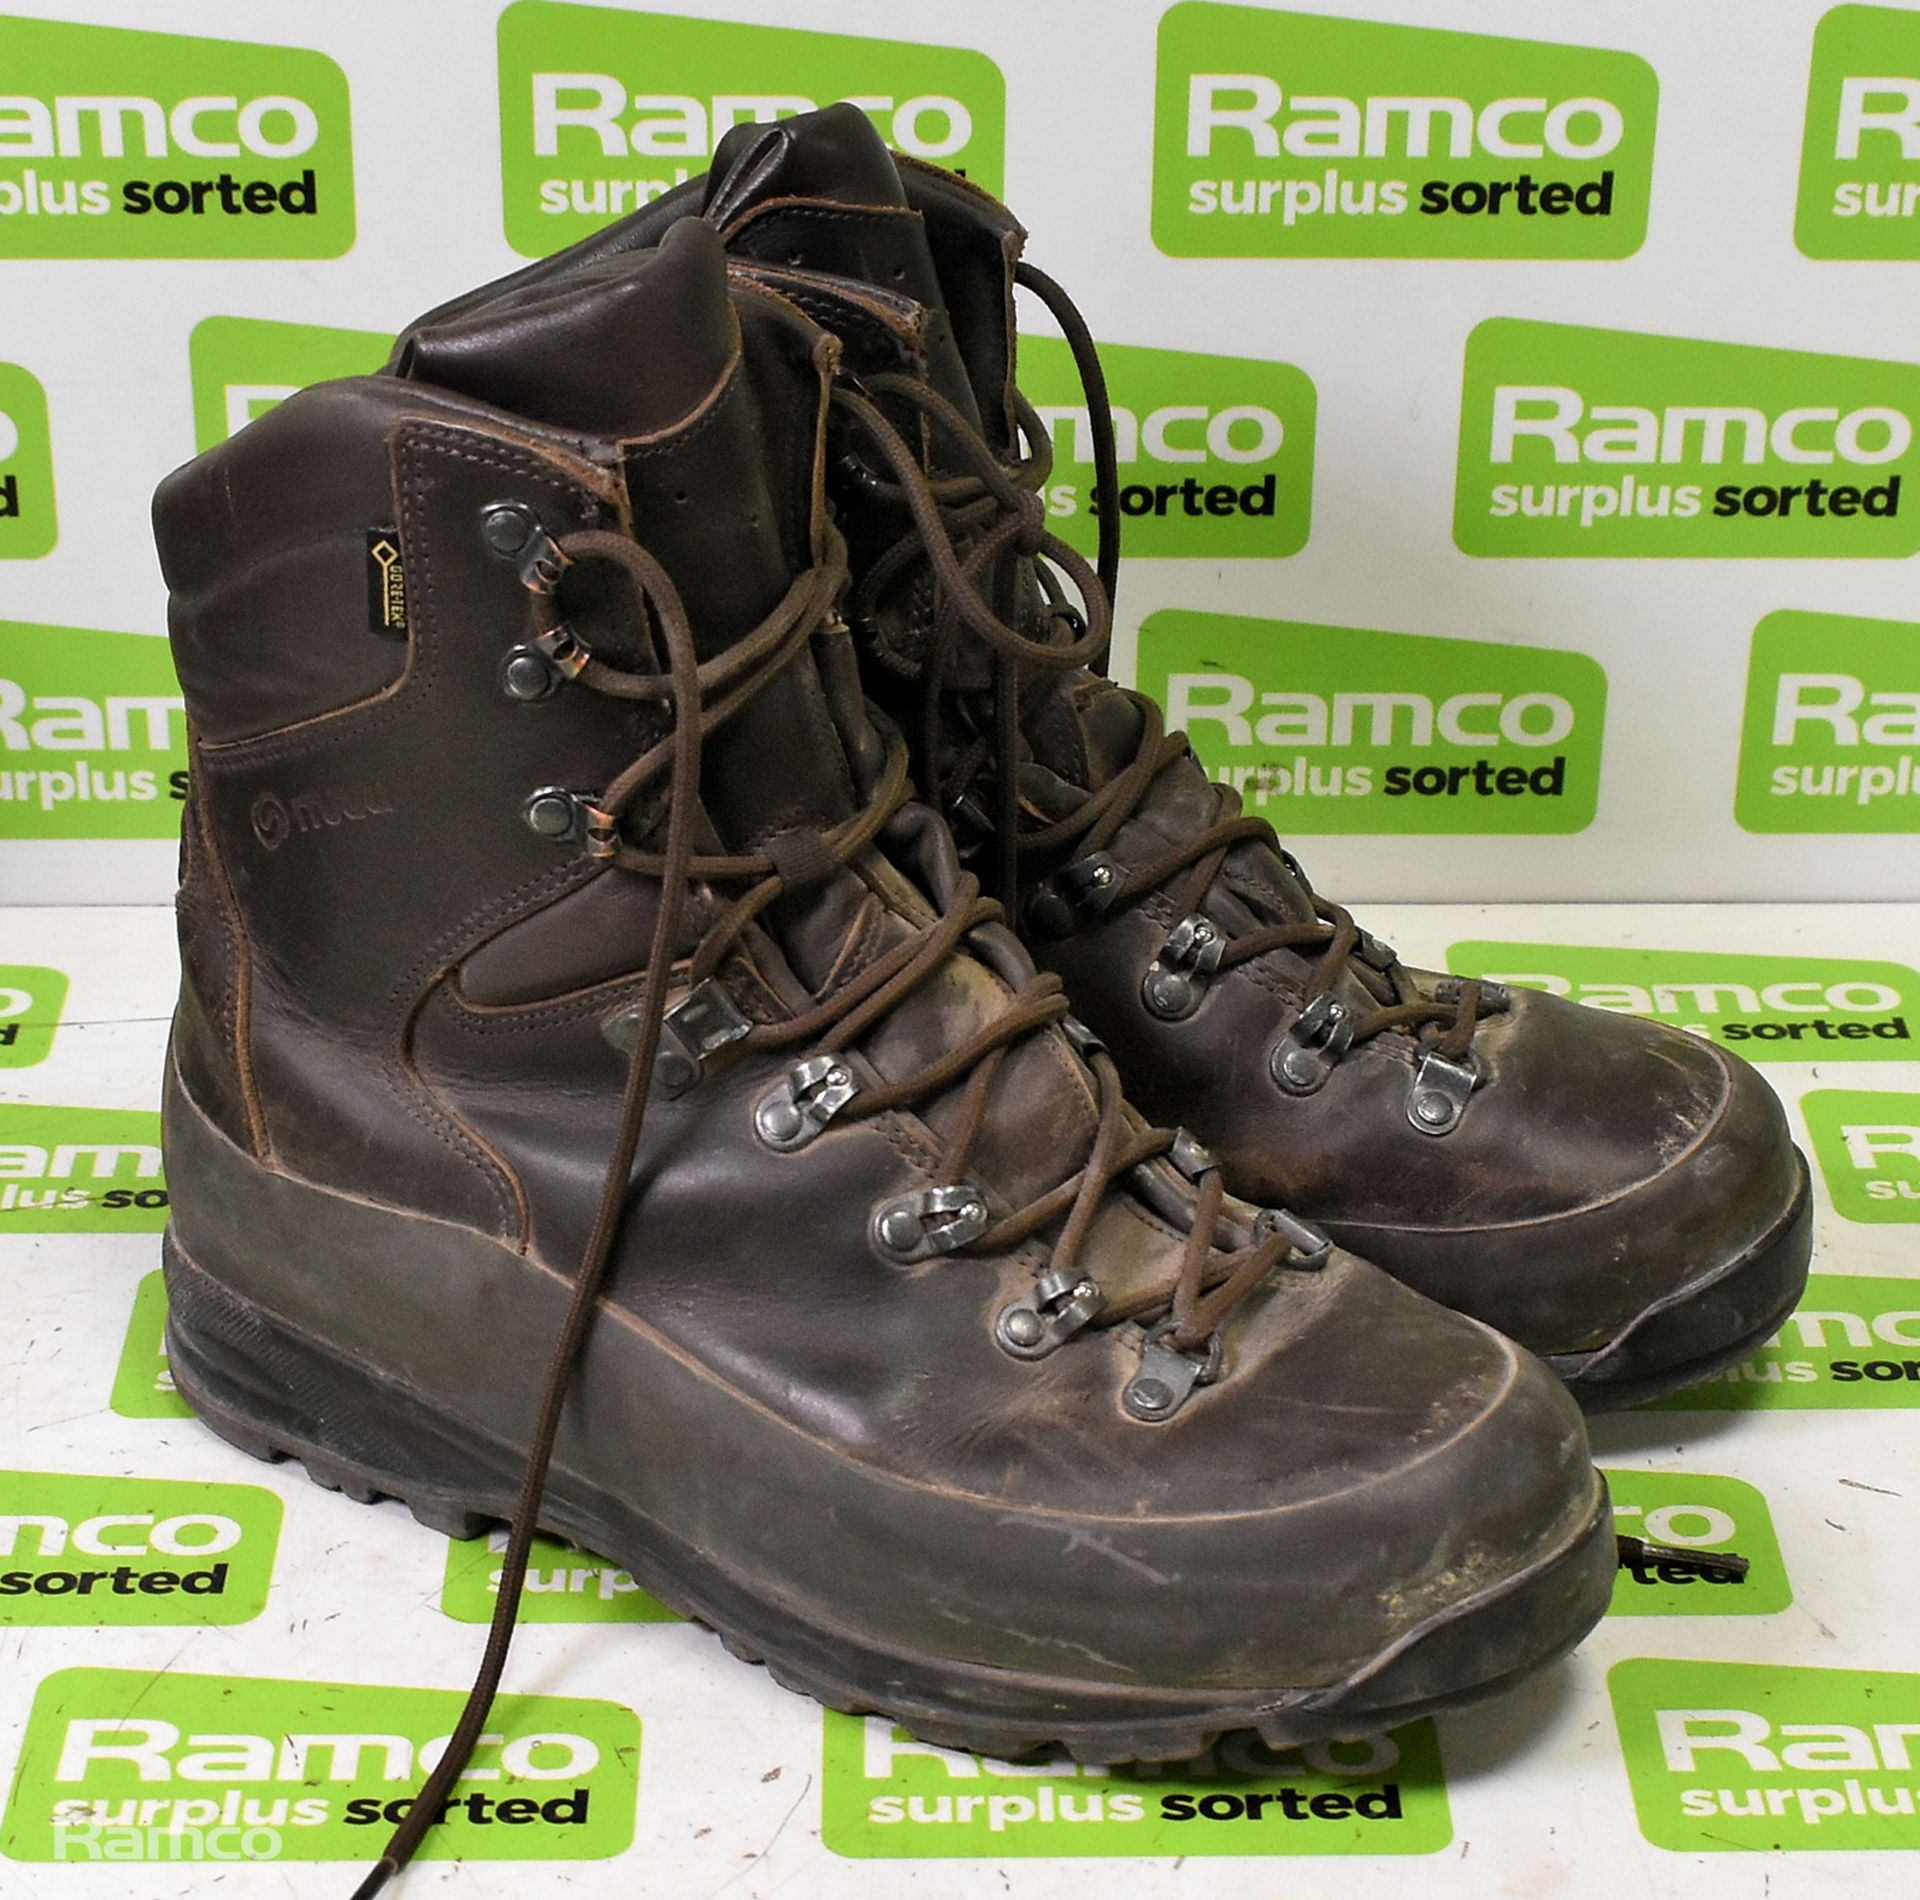 50x pairs of Various boots including Magnum, Iturri & YDS - mixed grades and sizes - Image 10 of 24